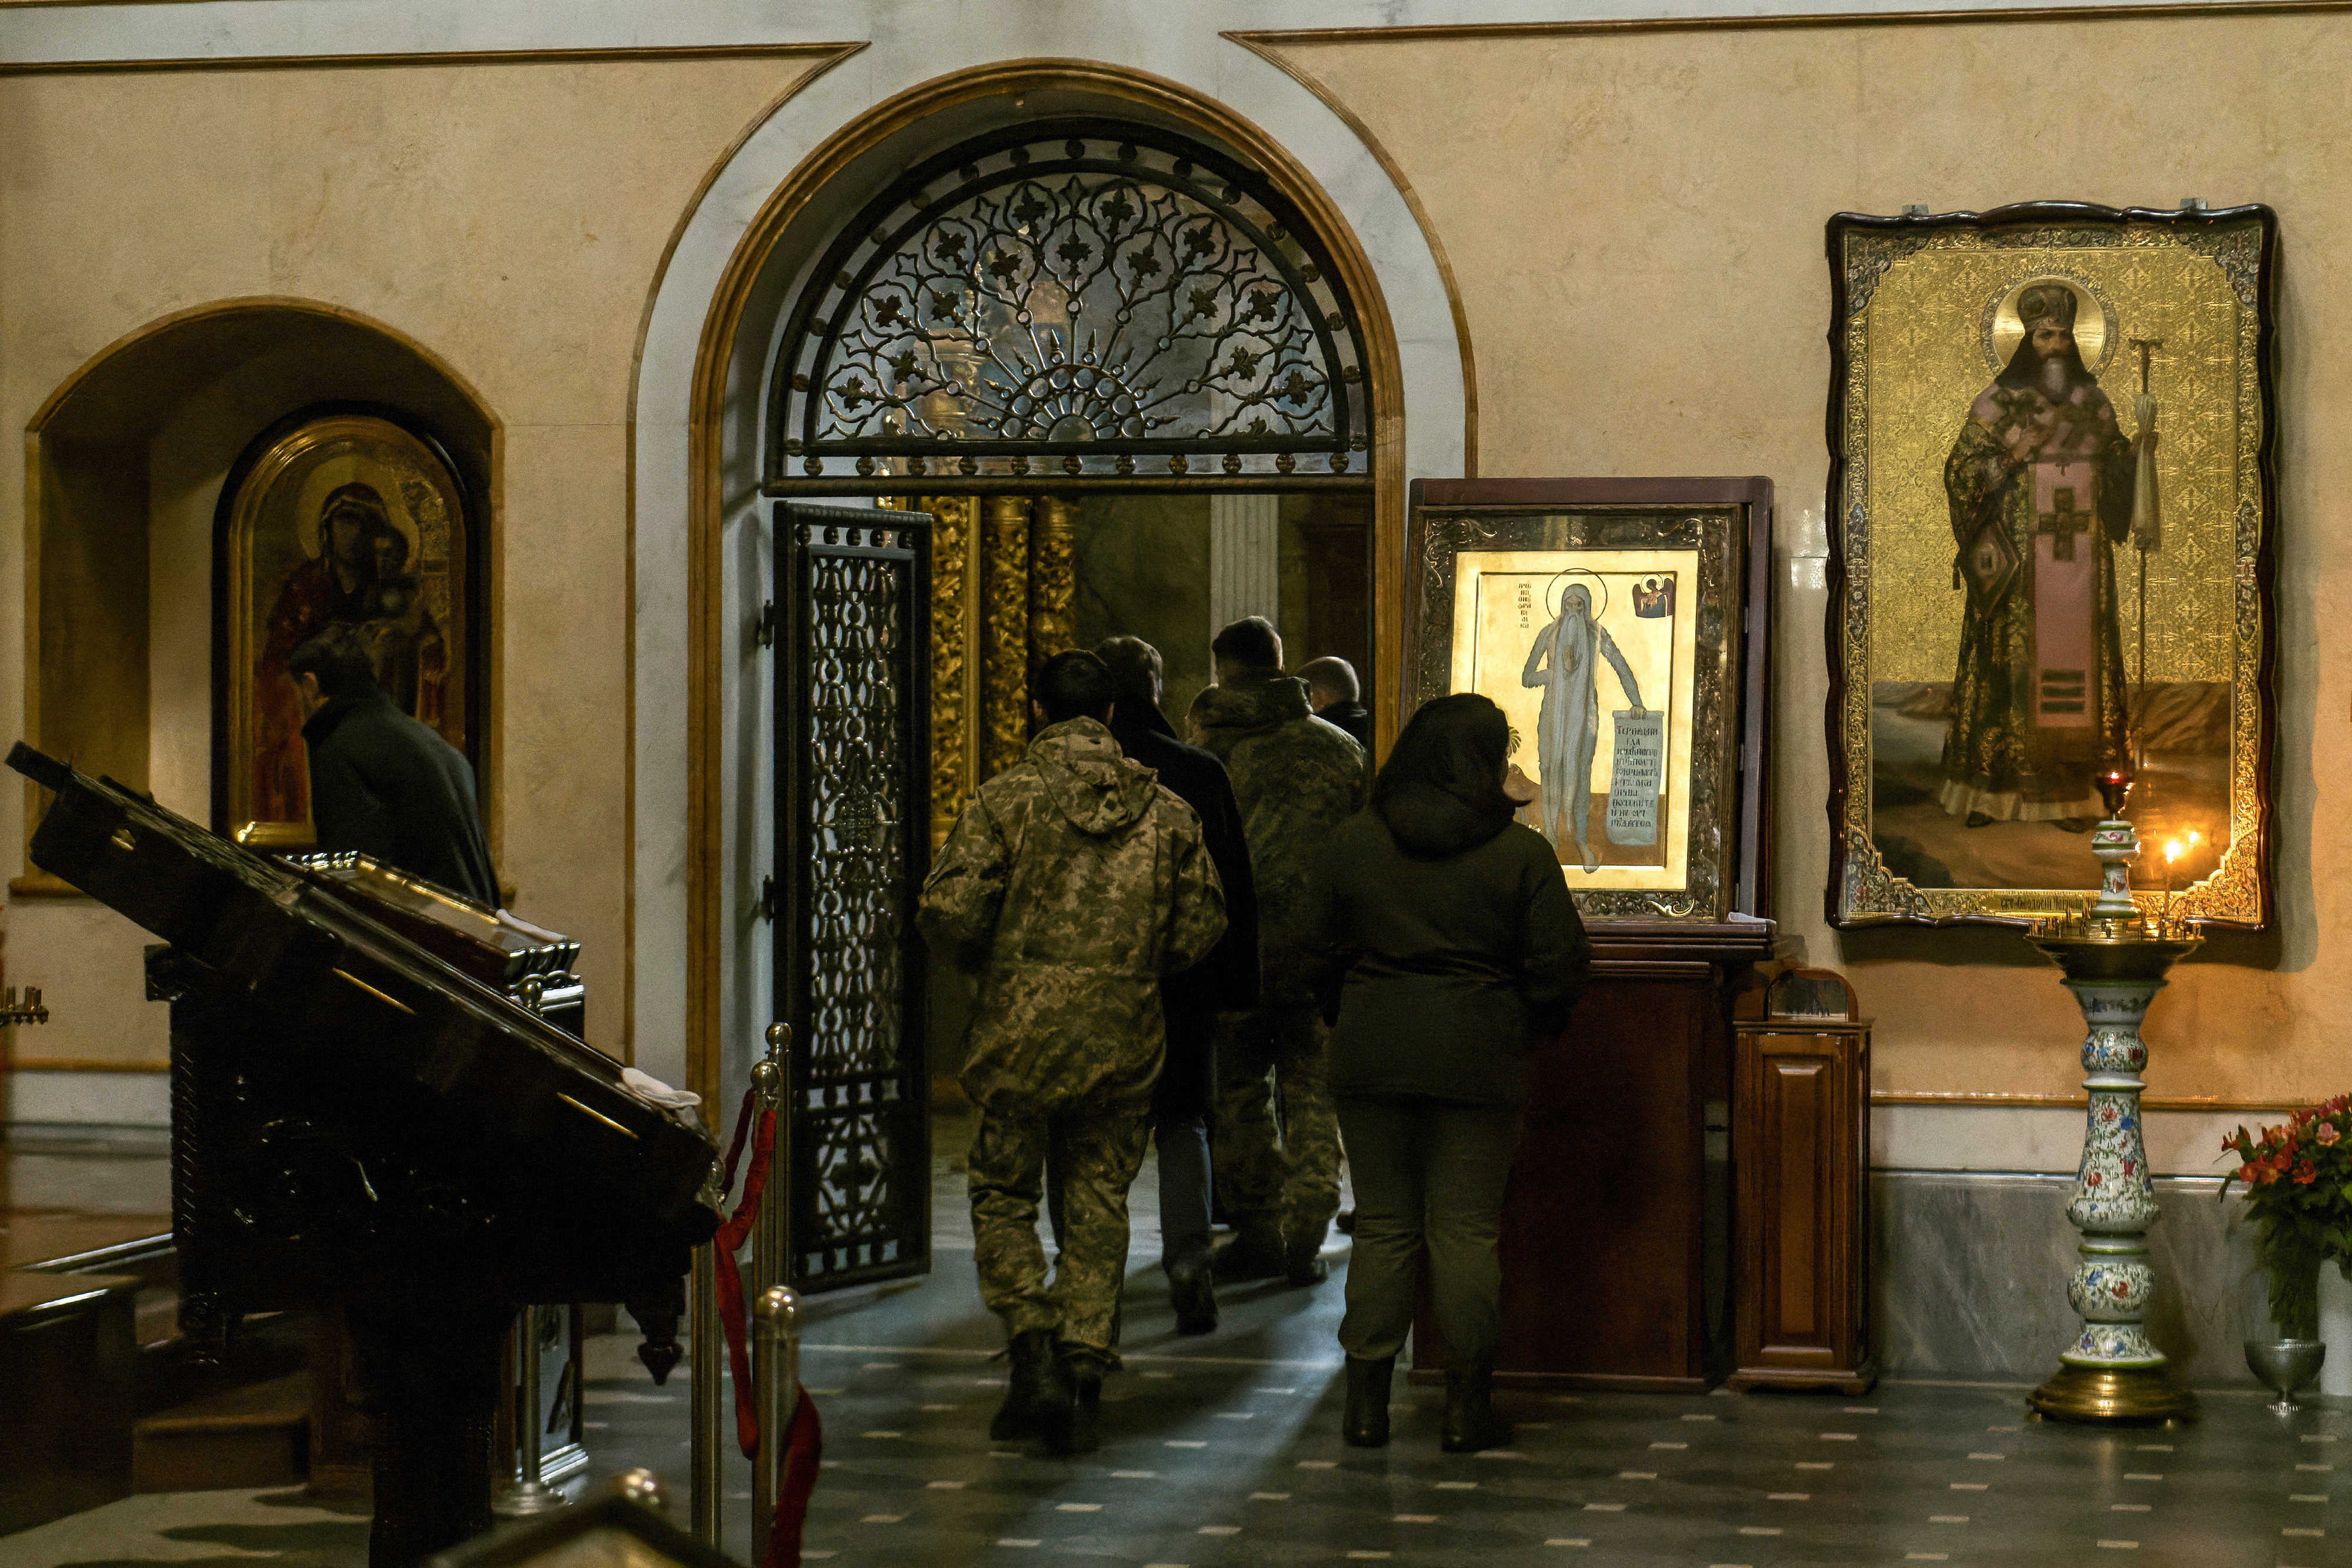 Ukrainian law enforcement officers inspect one of churches of the Kyiv Pechersk Lavra monastery in Kyiv